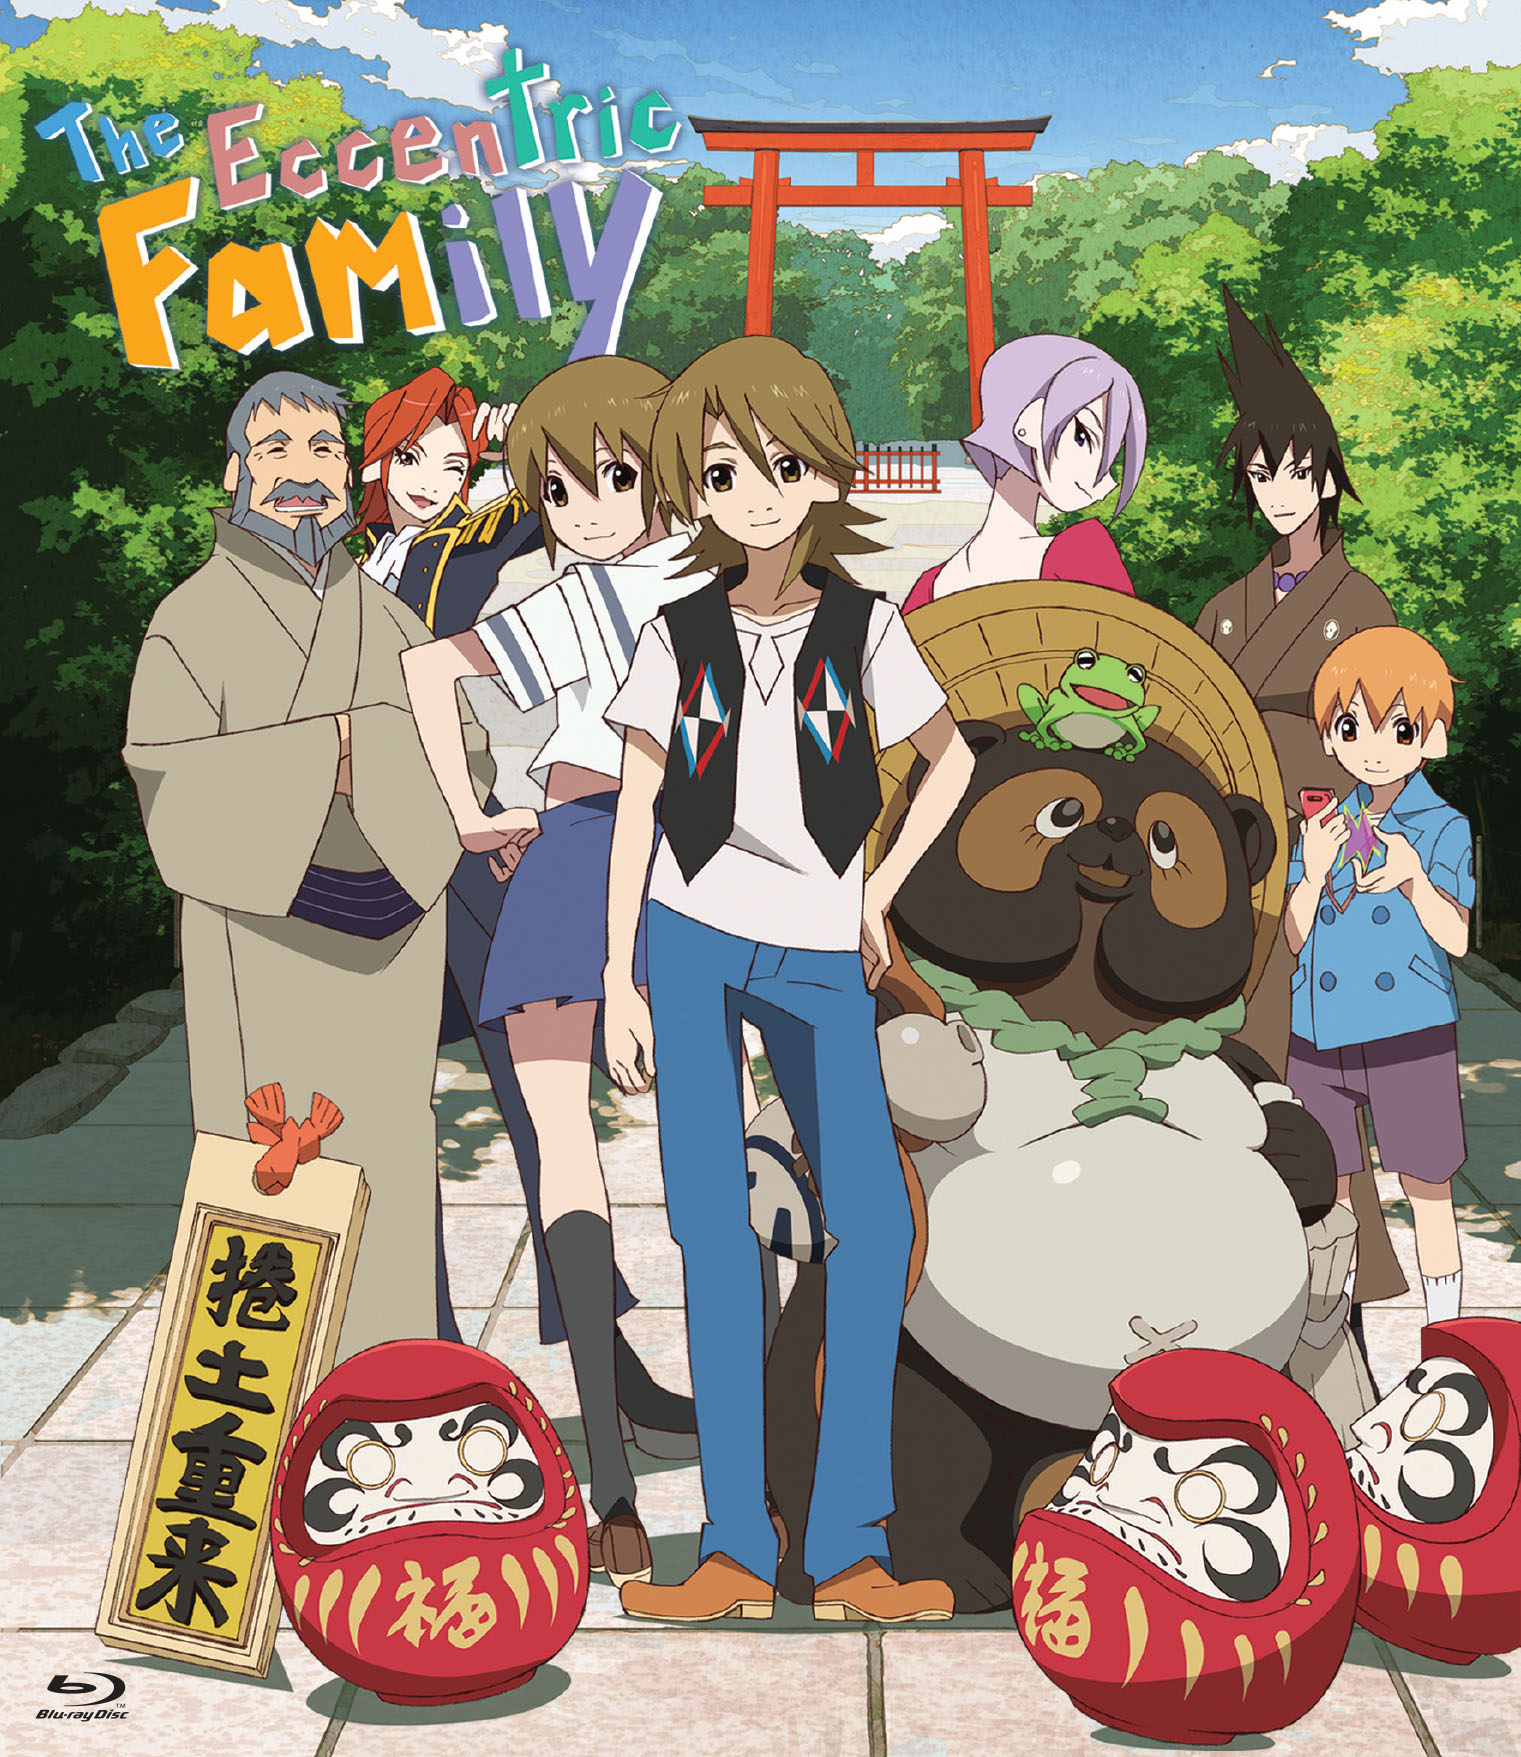 Eccentric Family 2 Review – What's In My Anime?